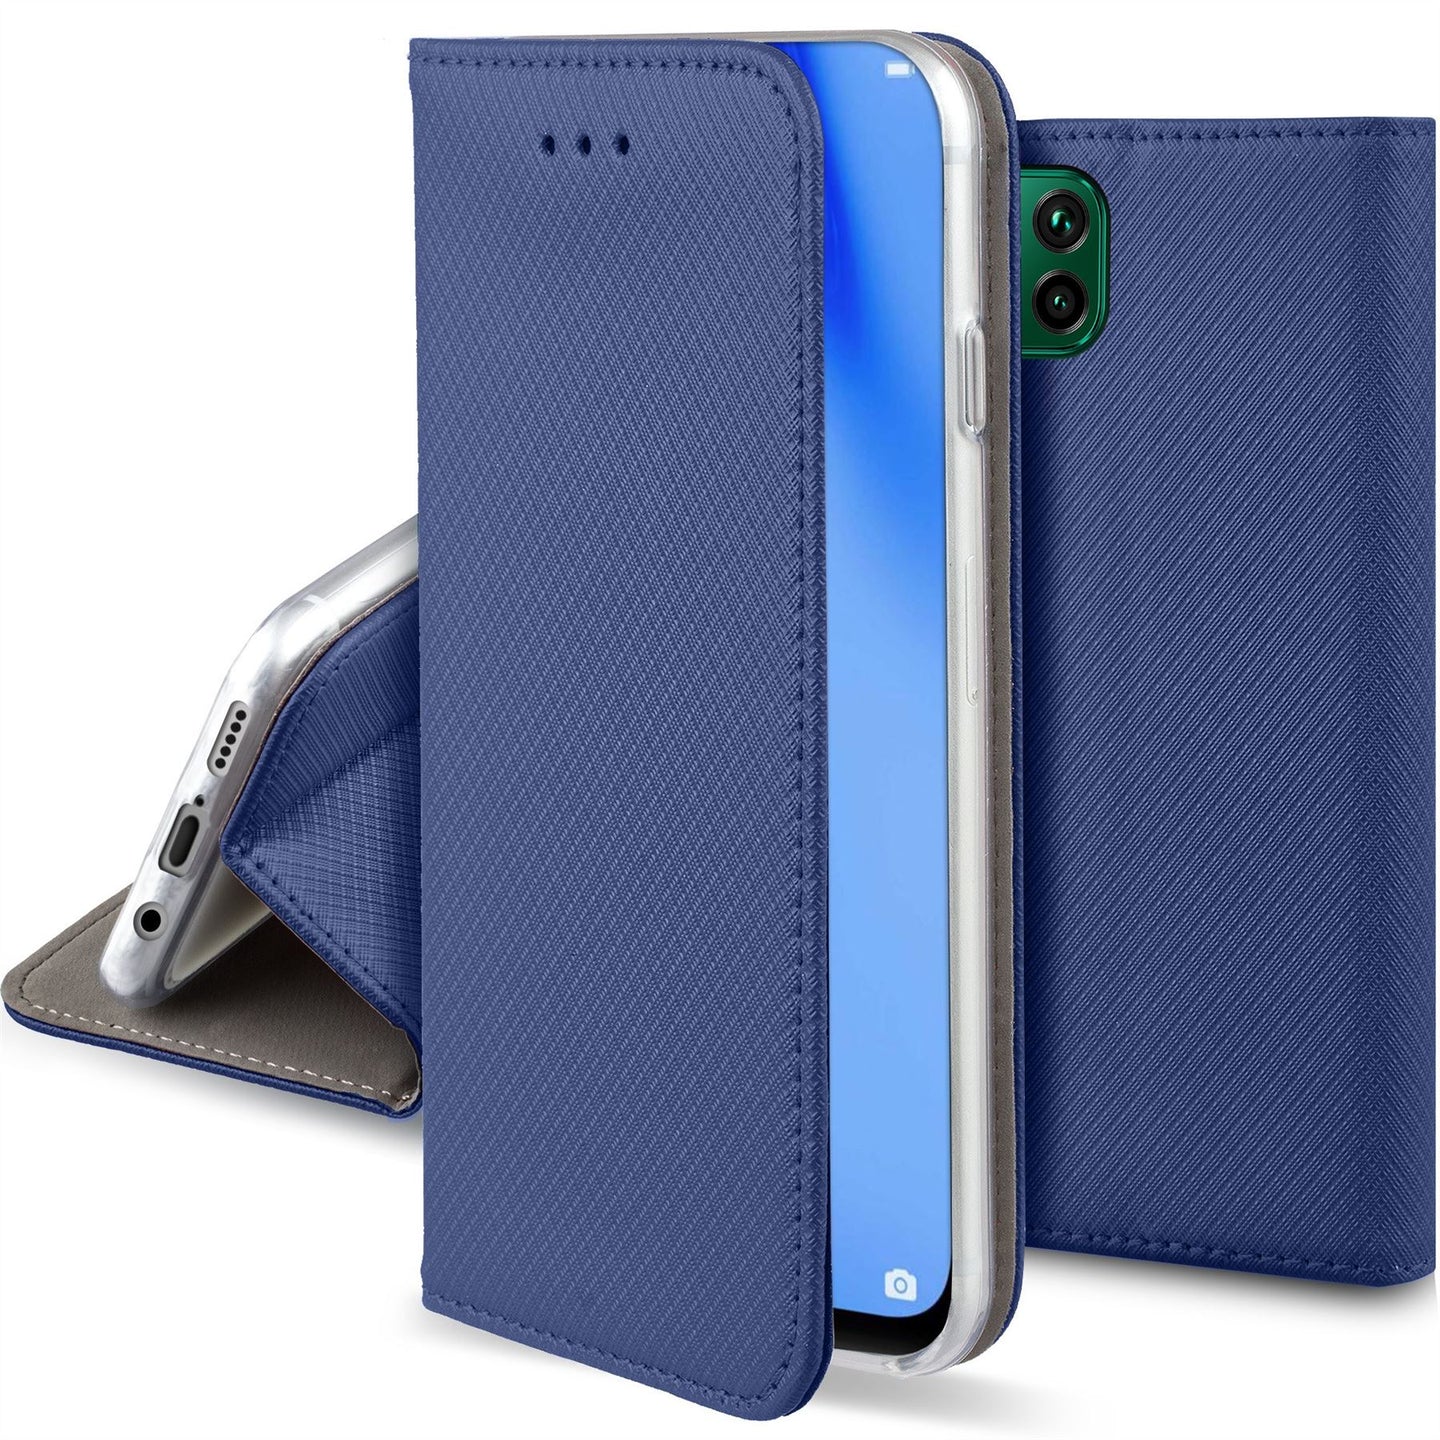 Moozy Case Flip Cover for Huawei P40 Lite, Dark Blue - Smart Magnetic Flip Case with Card Holder and Stand